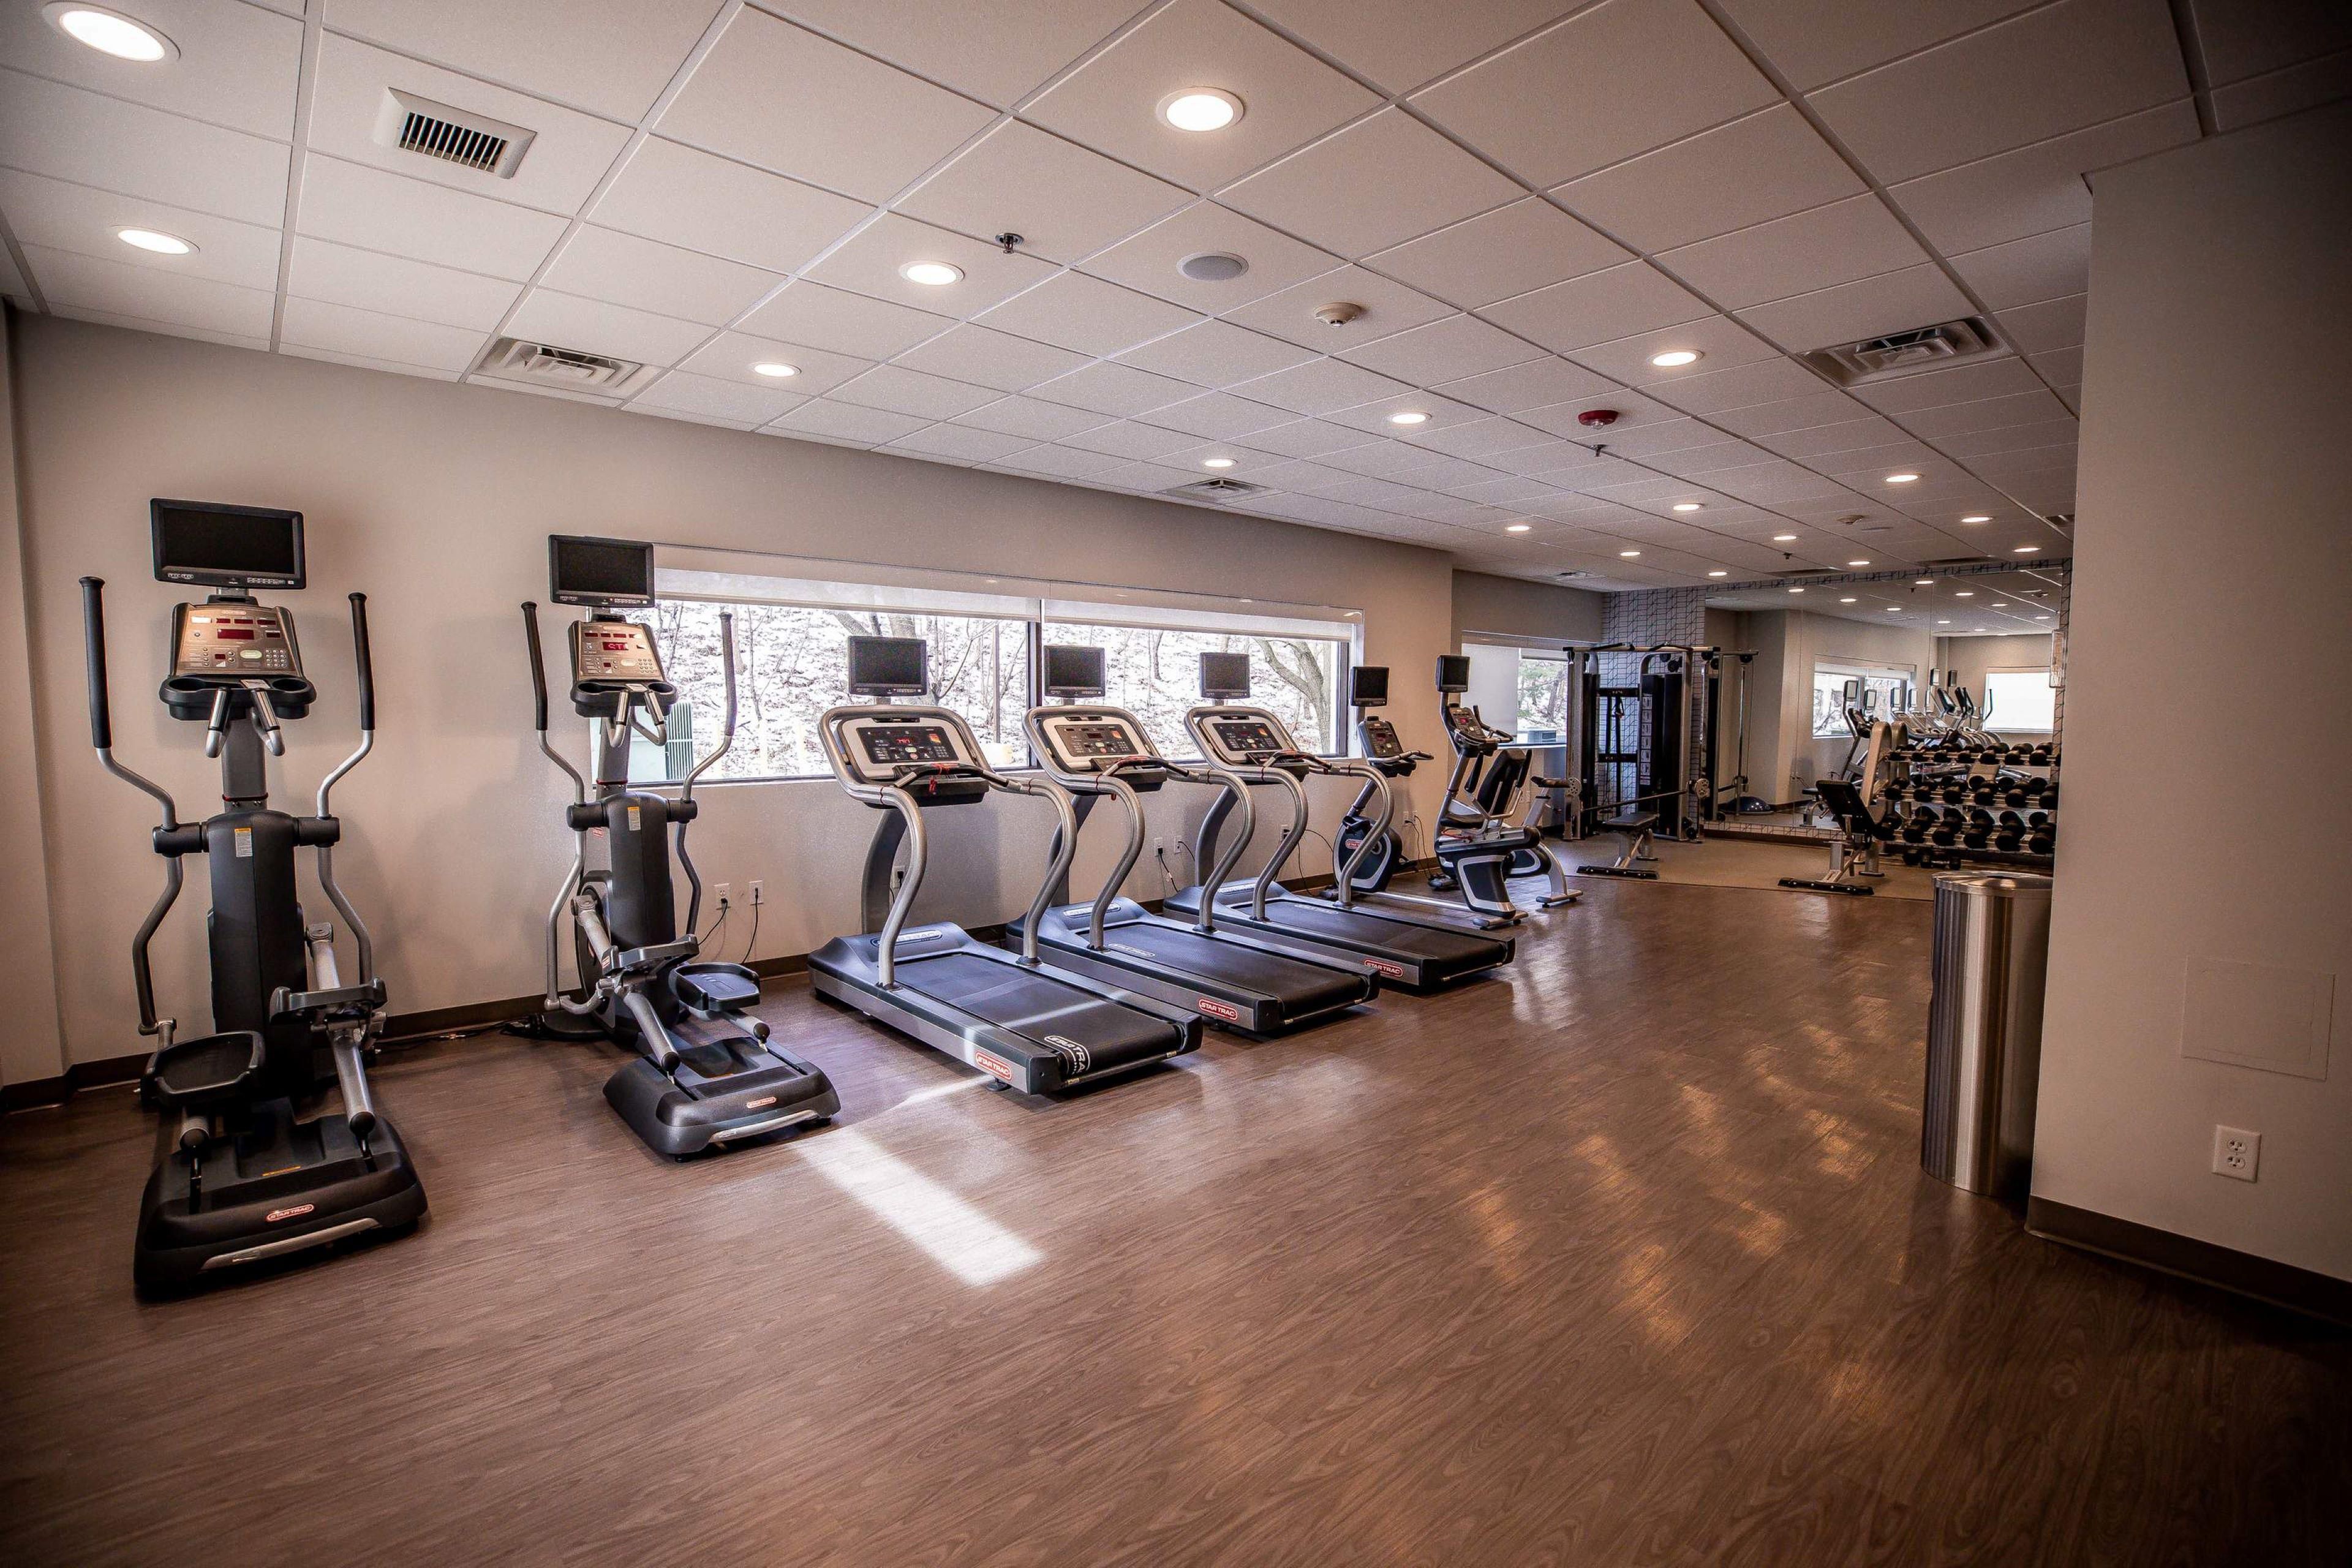 Take charge of your fitness at our Harrisburg-Hershey hotel, with our fully equipped fitness center. Indulge in a cardio workout with treadmills, elliptical machines, and stationary bikes, or strengthen and tone with free weights, yoga mats, and balance balls. With round-the-clock access, enjoy the convenience of working out on your own schedule. 